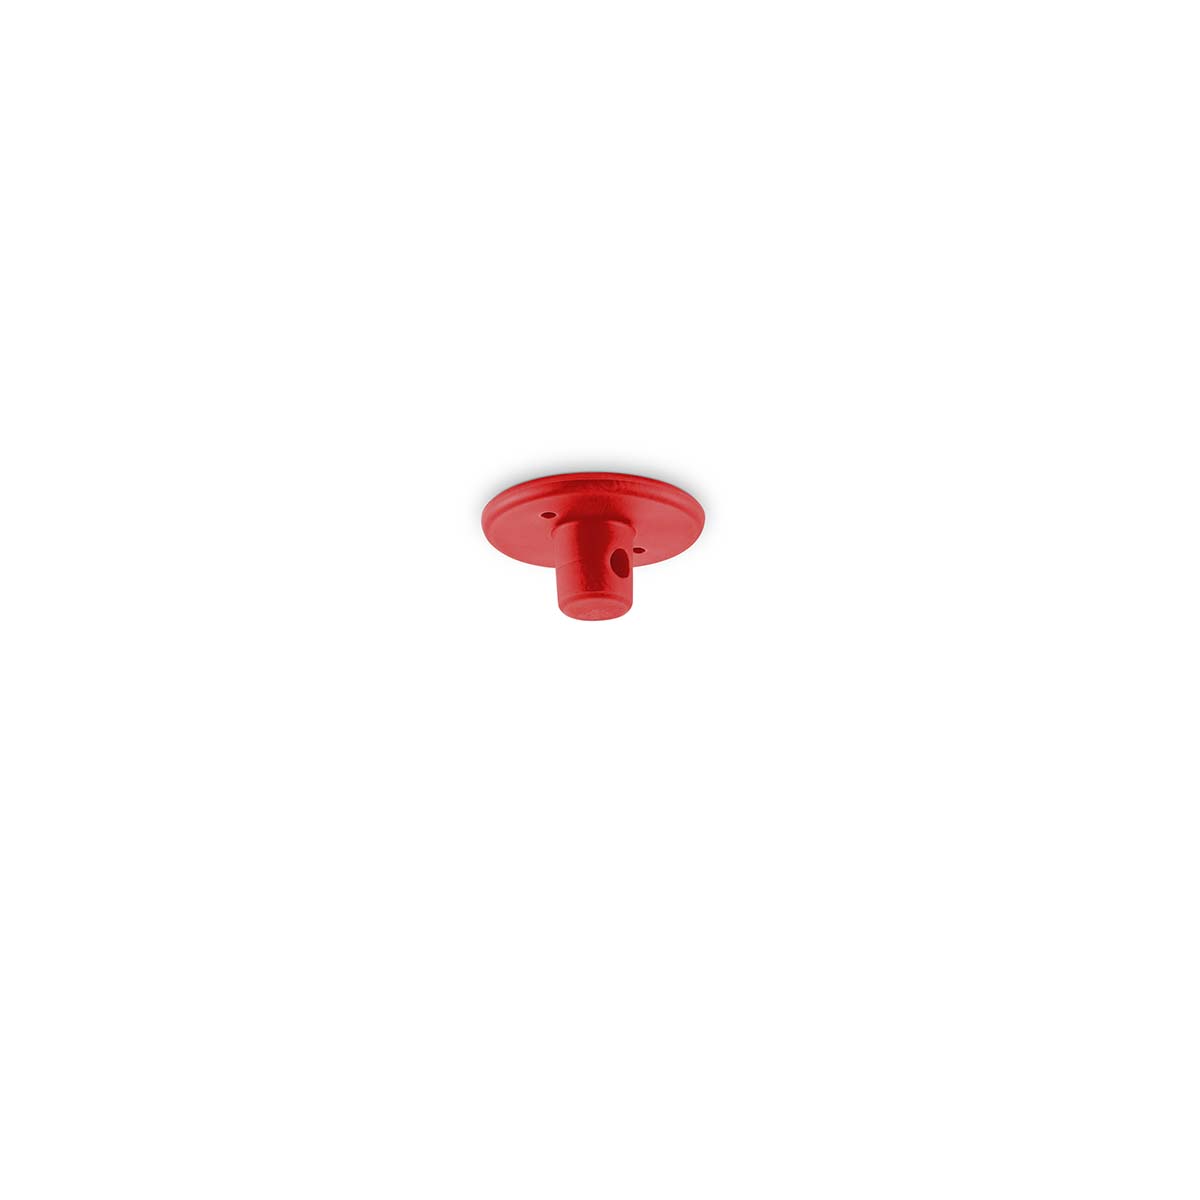 Tangla lighting - TLHG003RD - Silicone cable hanger - mix and match - red